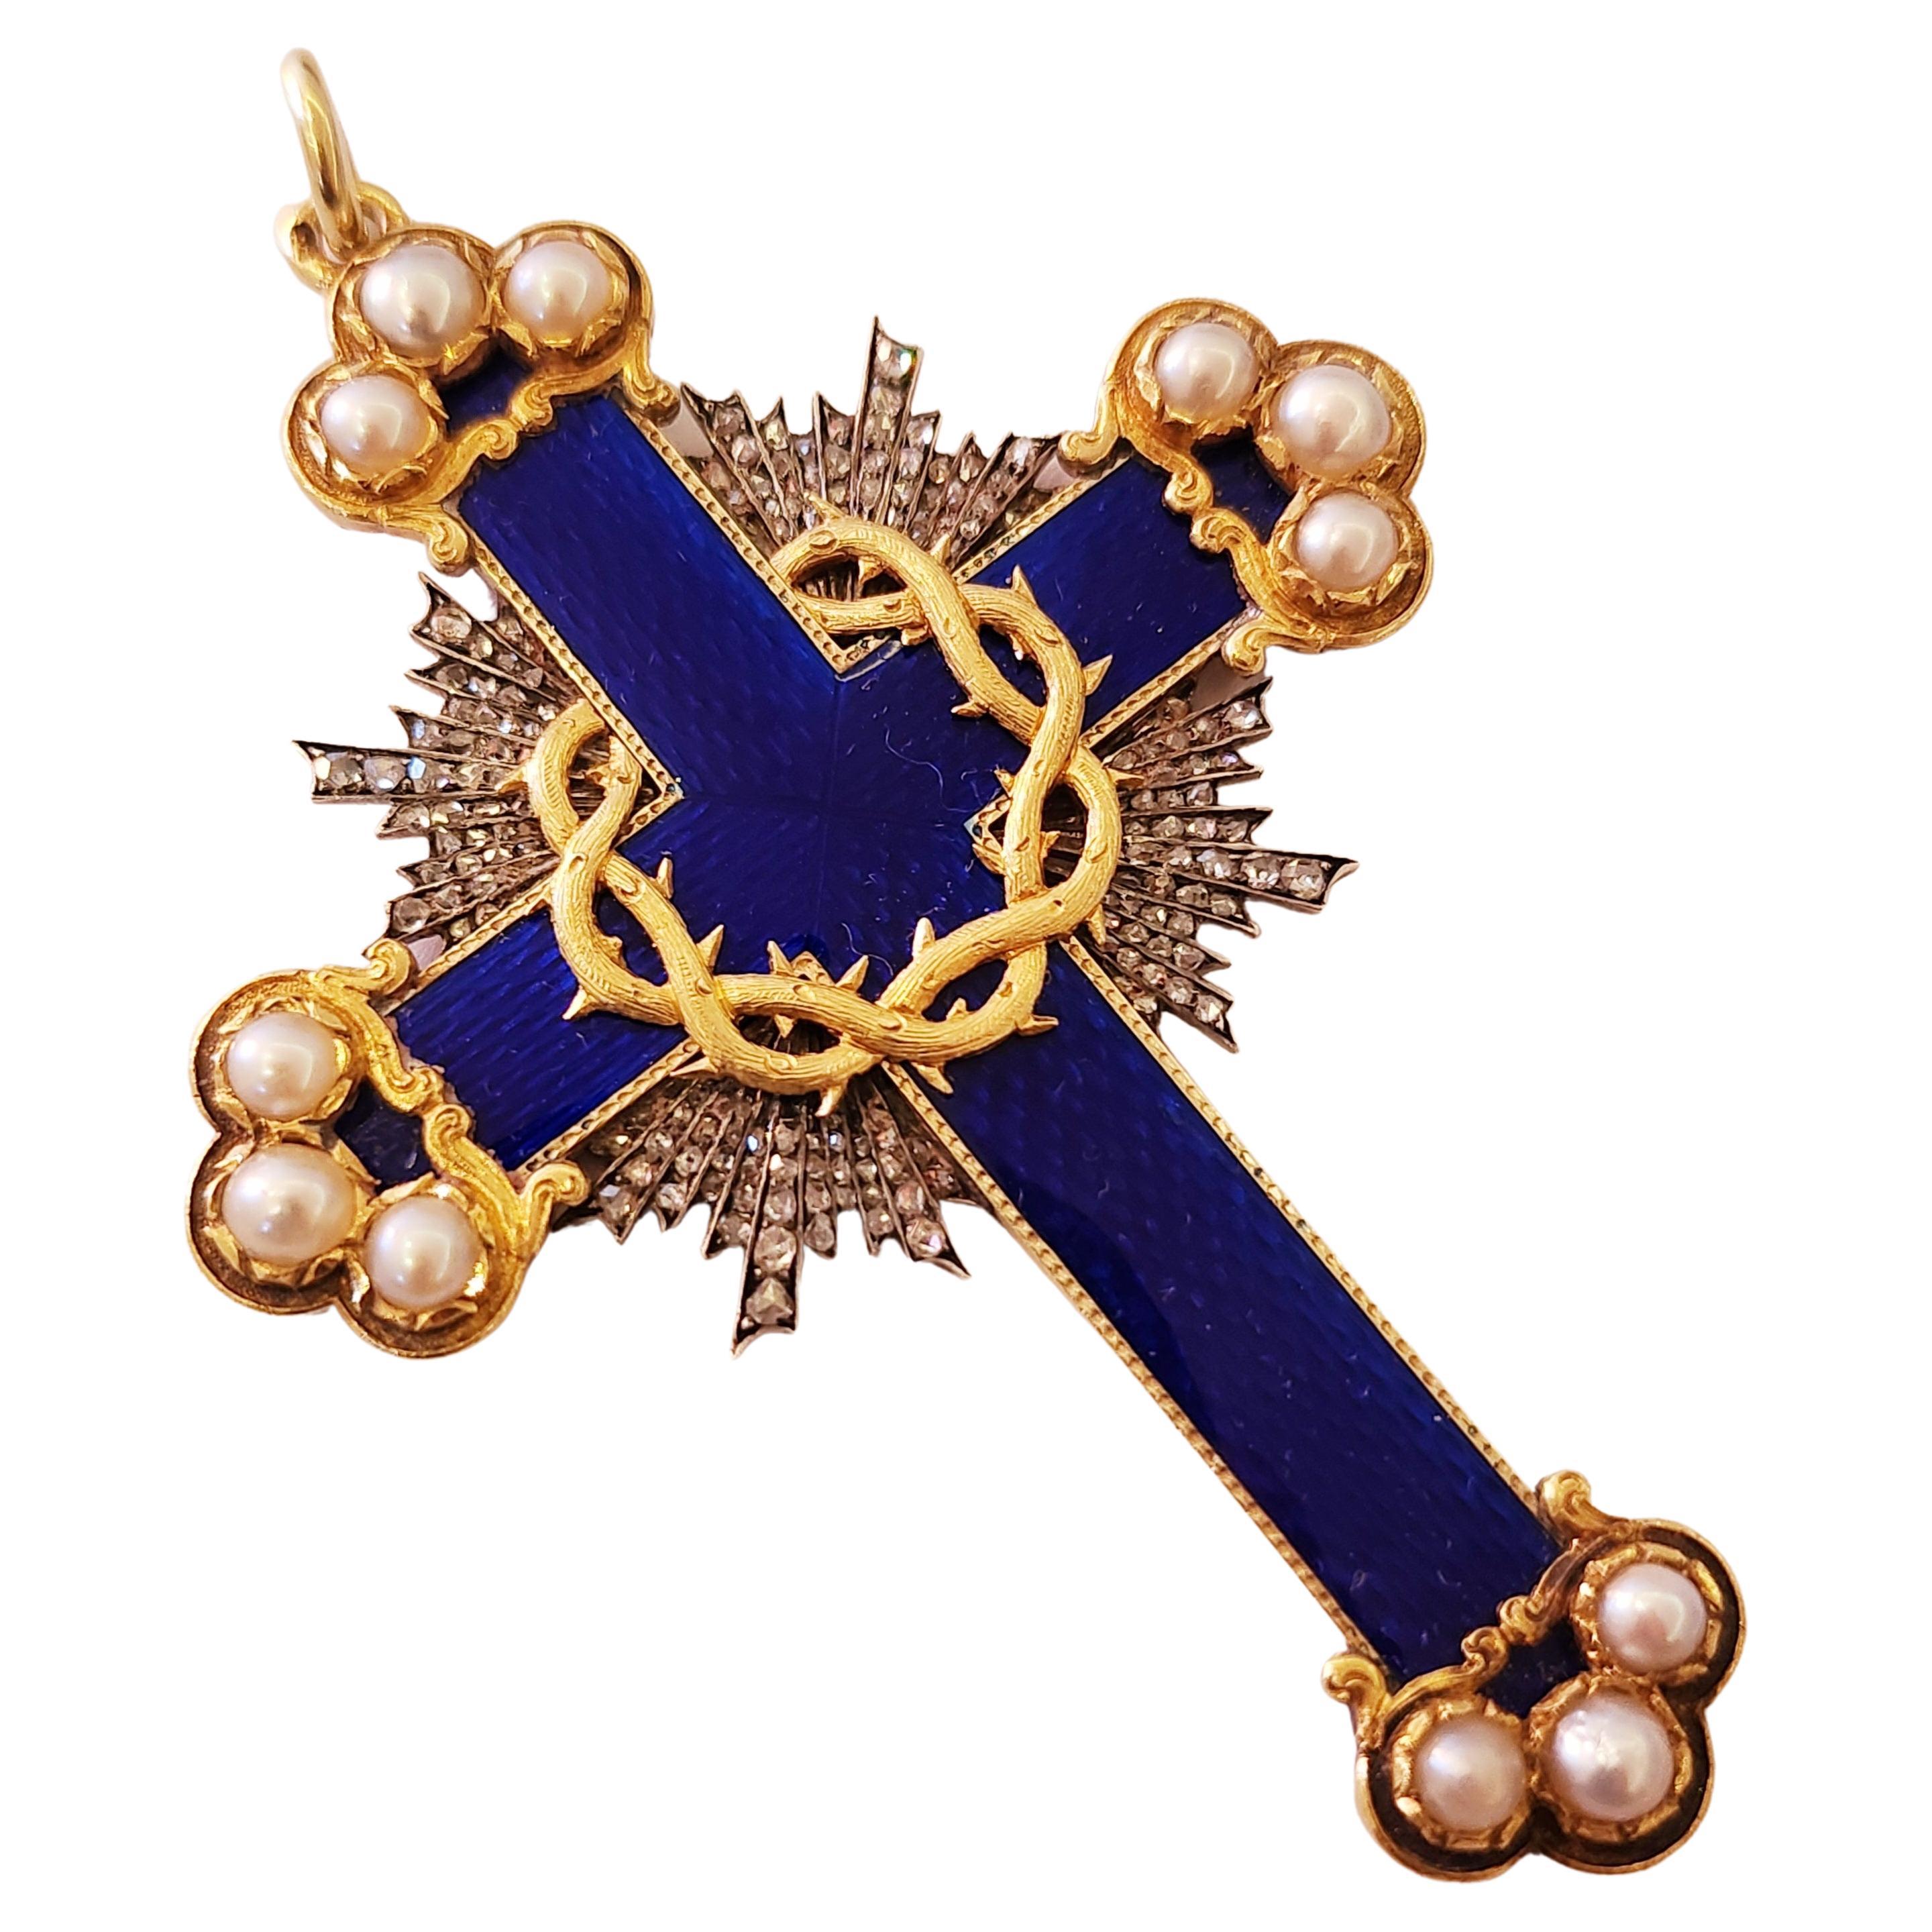 Antique 14k gold large russian cross pendentif in blue guilloche emamel with rose cut diamonds estimate weight of 2 carats and 12 white natural pearls this unuswal cross was made in st petersburg 1844.c during the imperial russian era with total